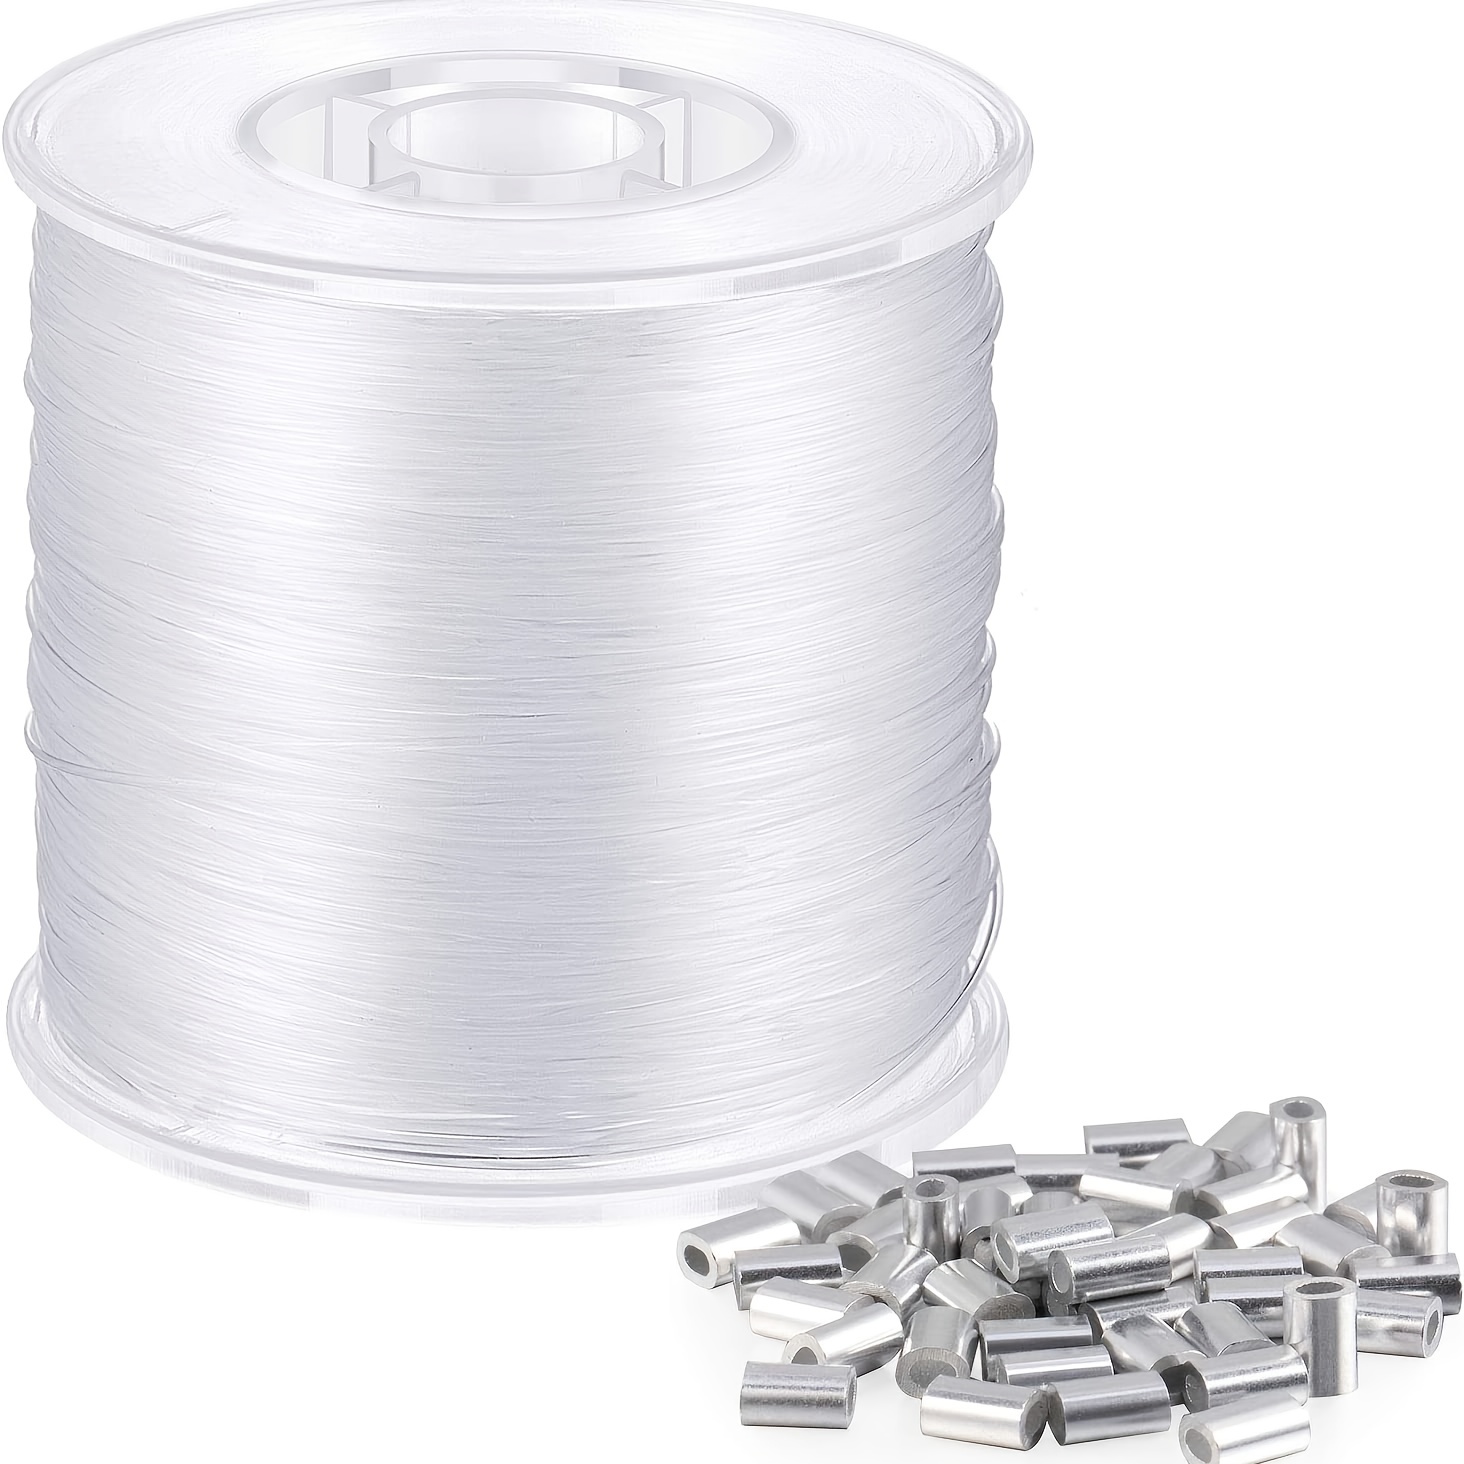 Premium Transparent Fluorocarbon Monofilament Fishing Line - Perfect for  Anglers!